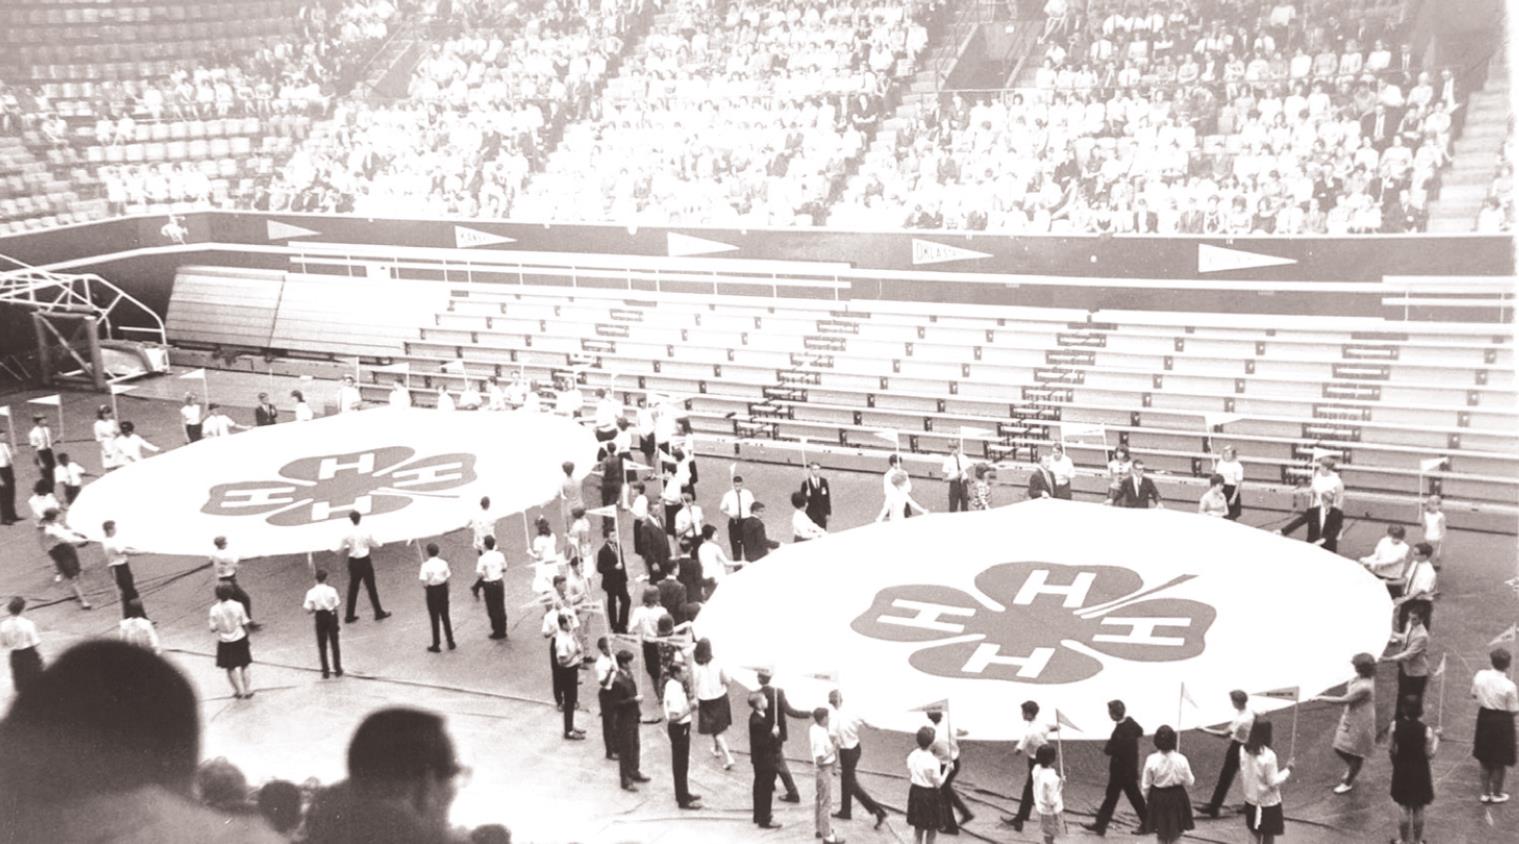 Delegates in this undated photo take part in State 4-H Roundup in what is now Gallagher/Iba Arena on the Oklahoma State University campus in Stillwater. Provided